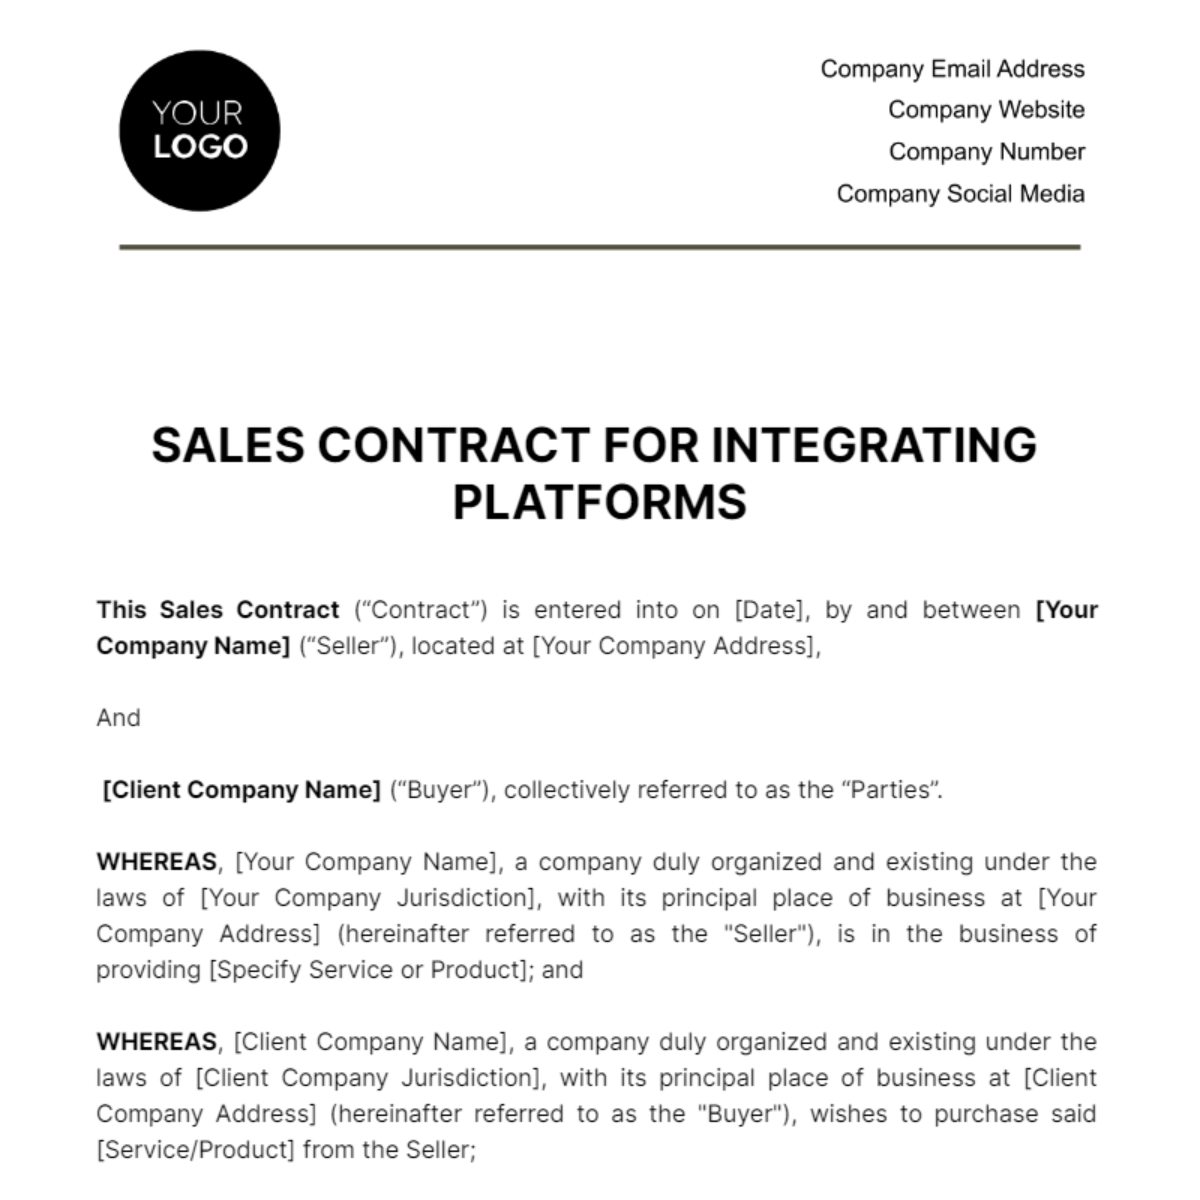 Free Sales Contract for Integrating Platforms Template